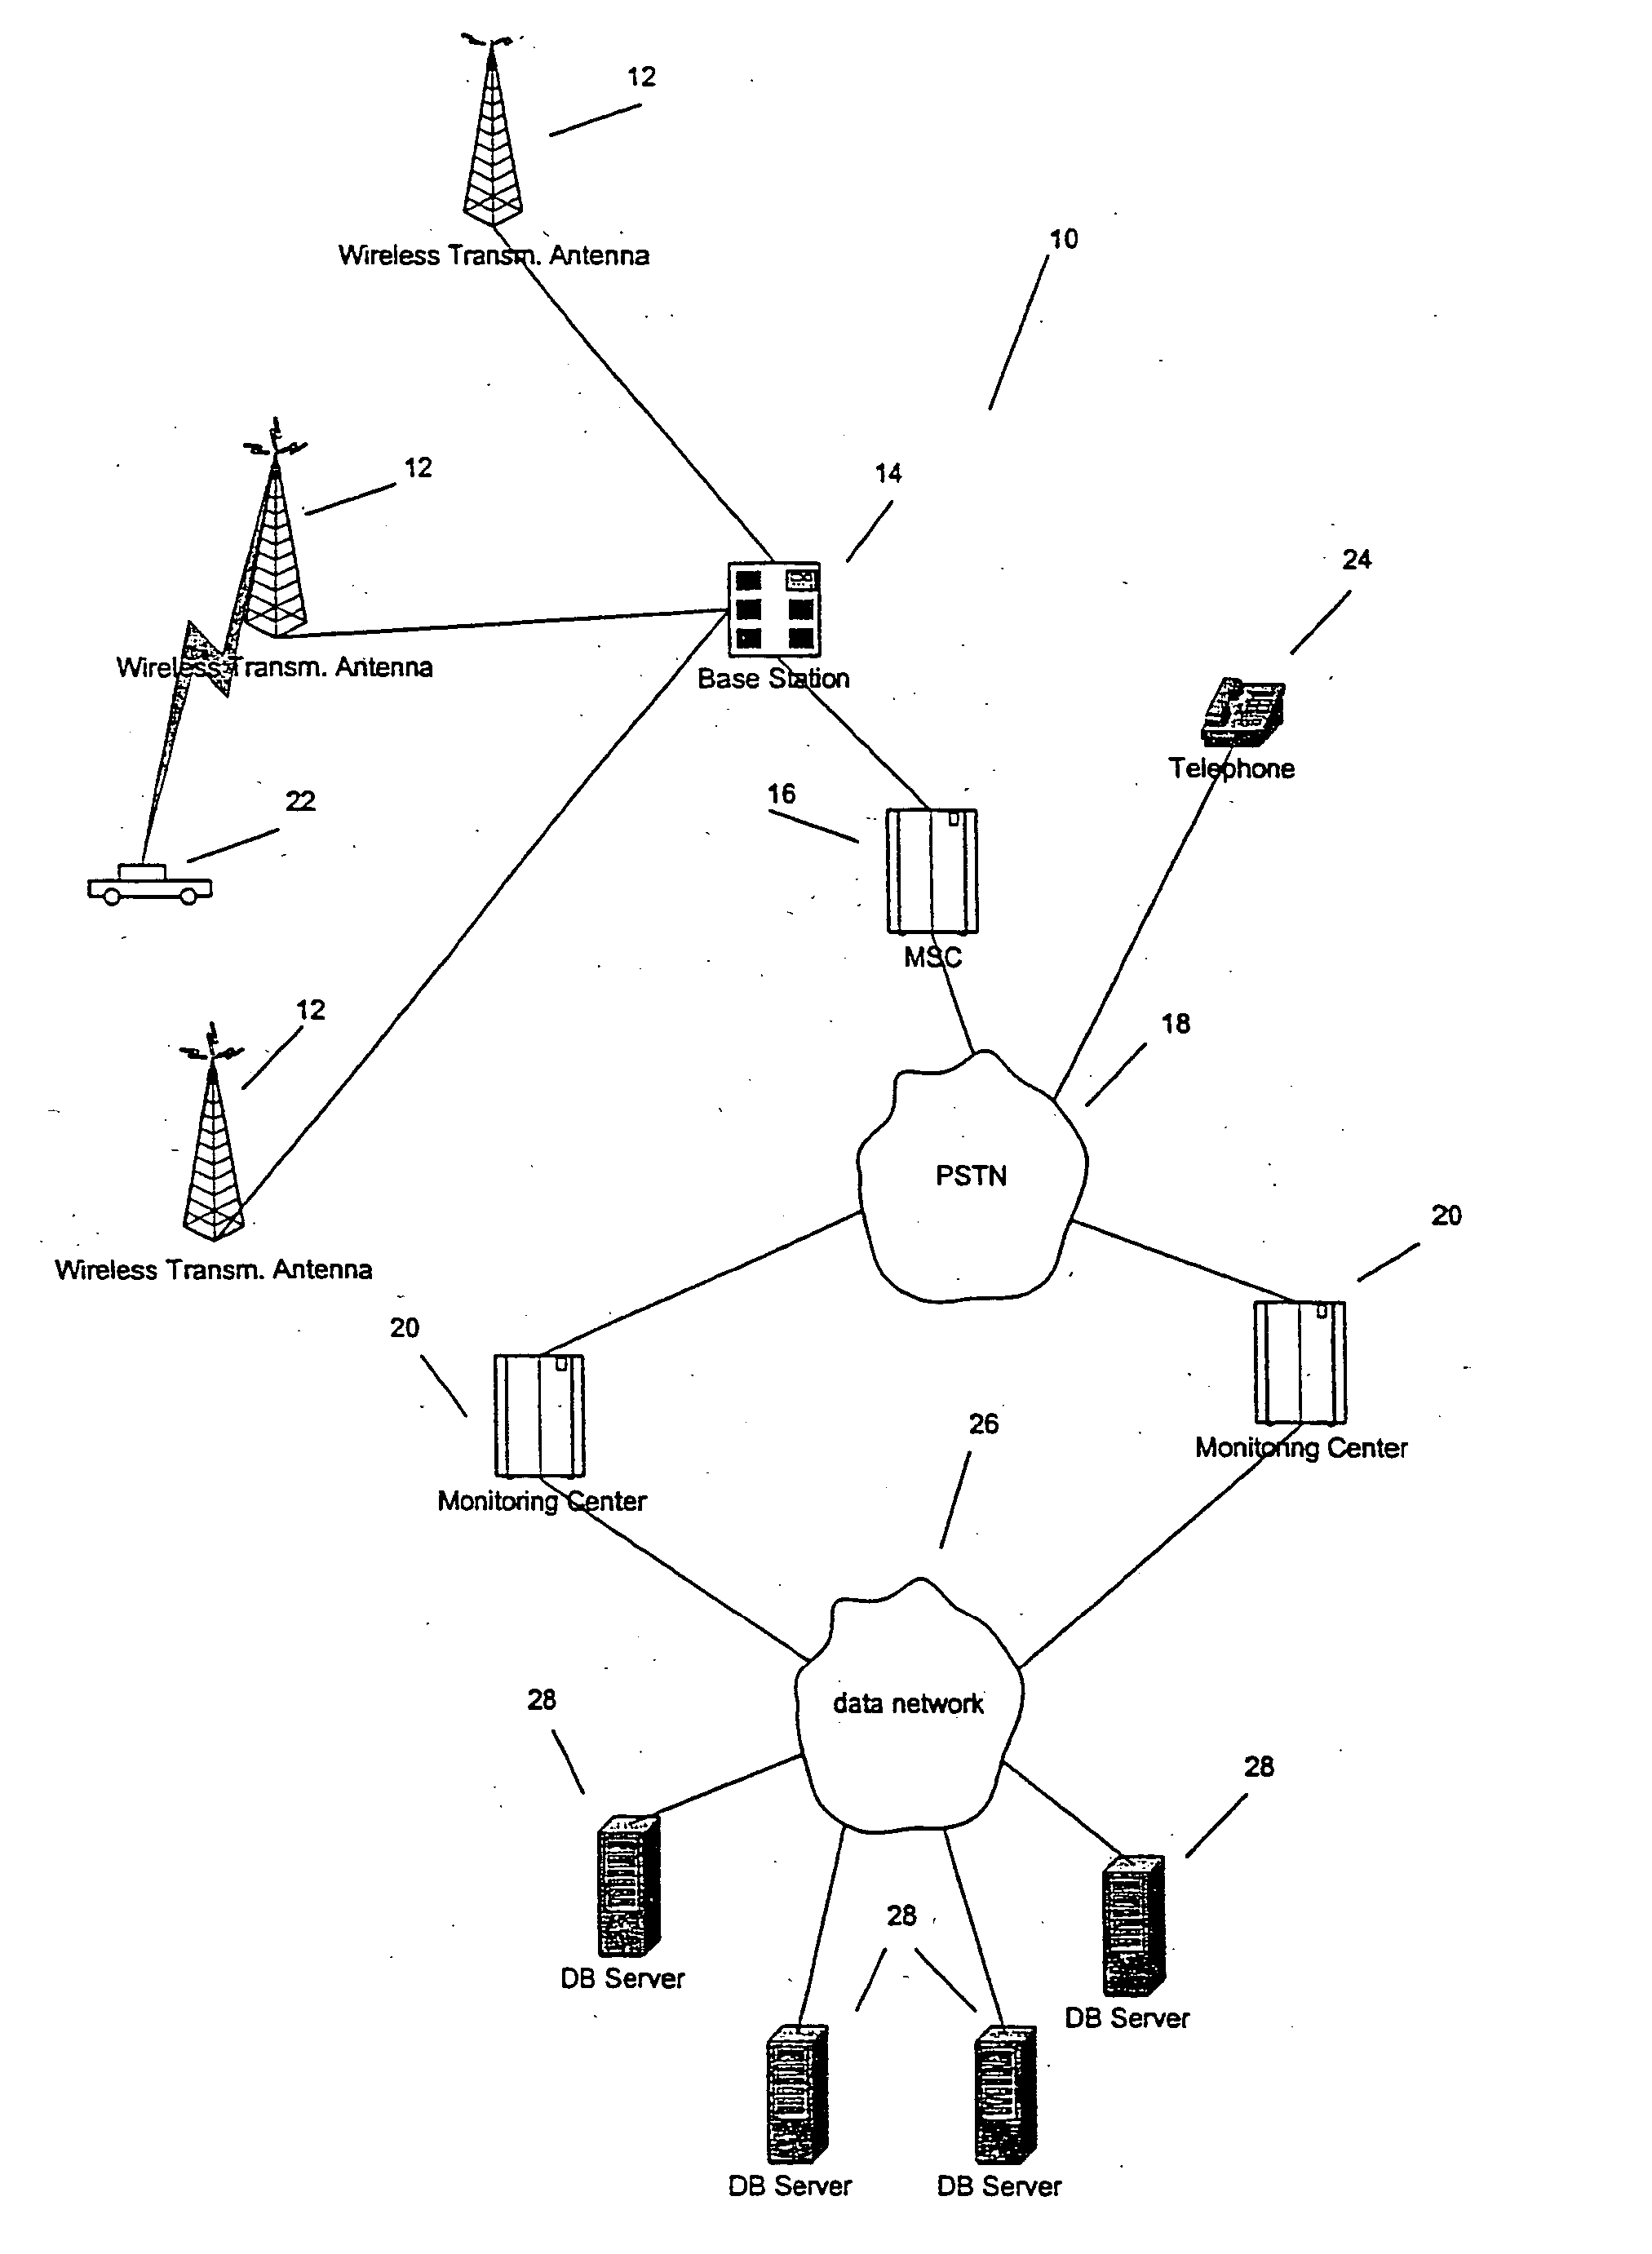 Systems and methods for distributed processing of location information associated with emergency 911 wireless transmissions